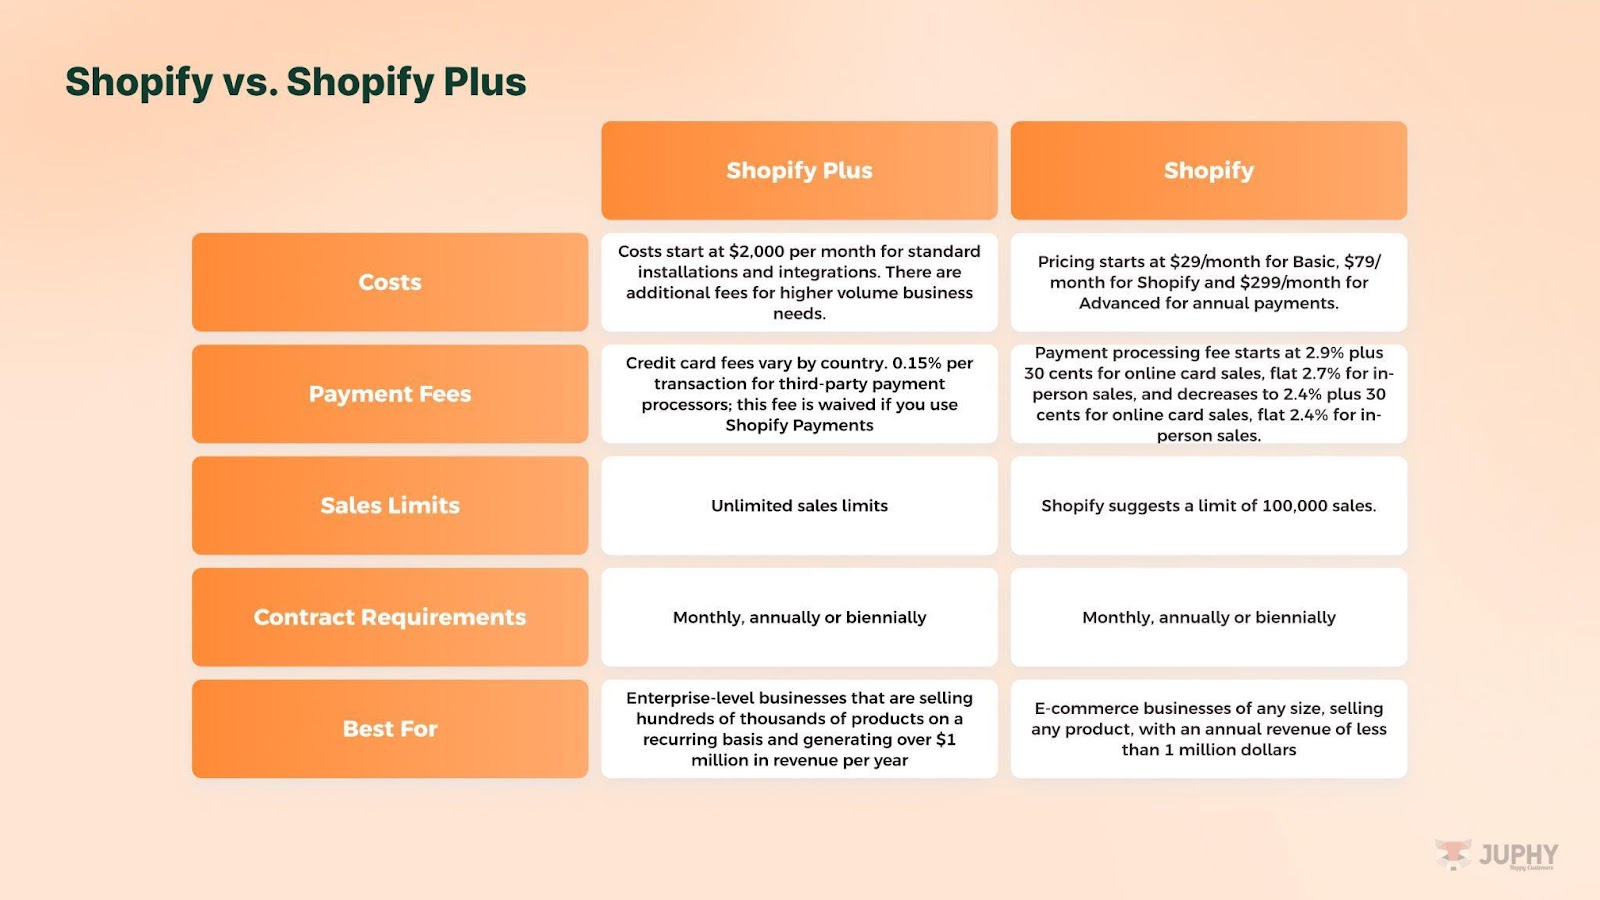 Shopify Plus has different payment fees and sales limits.